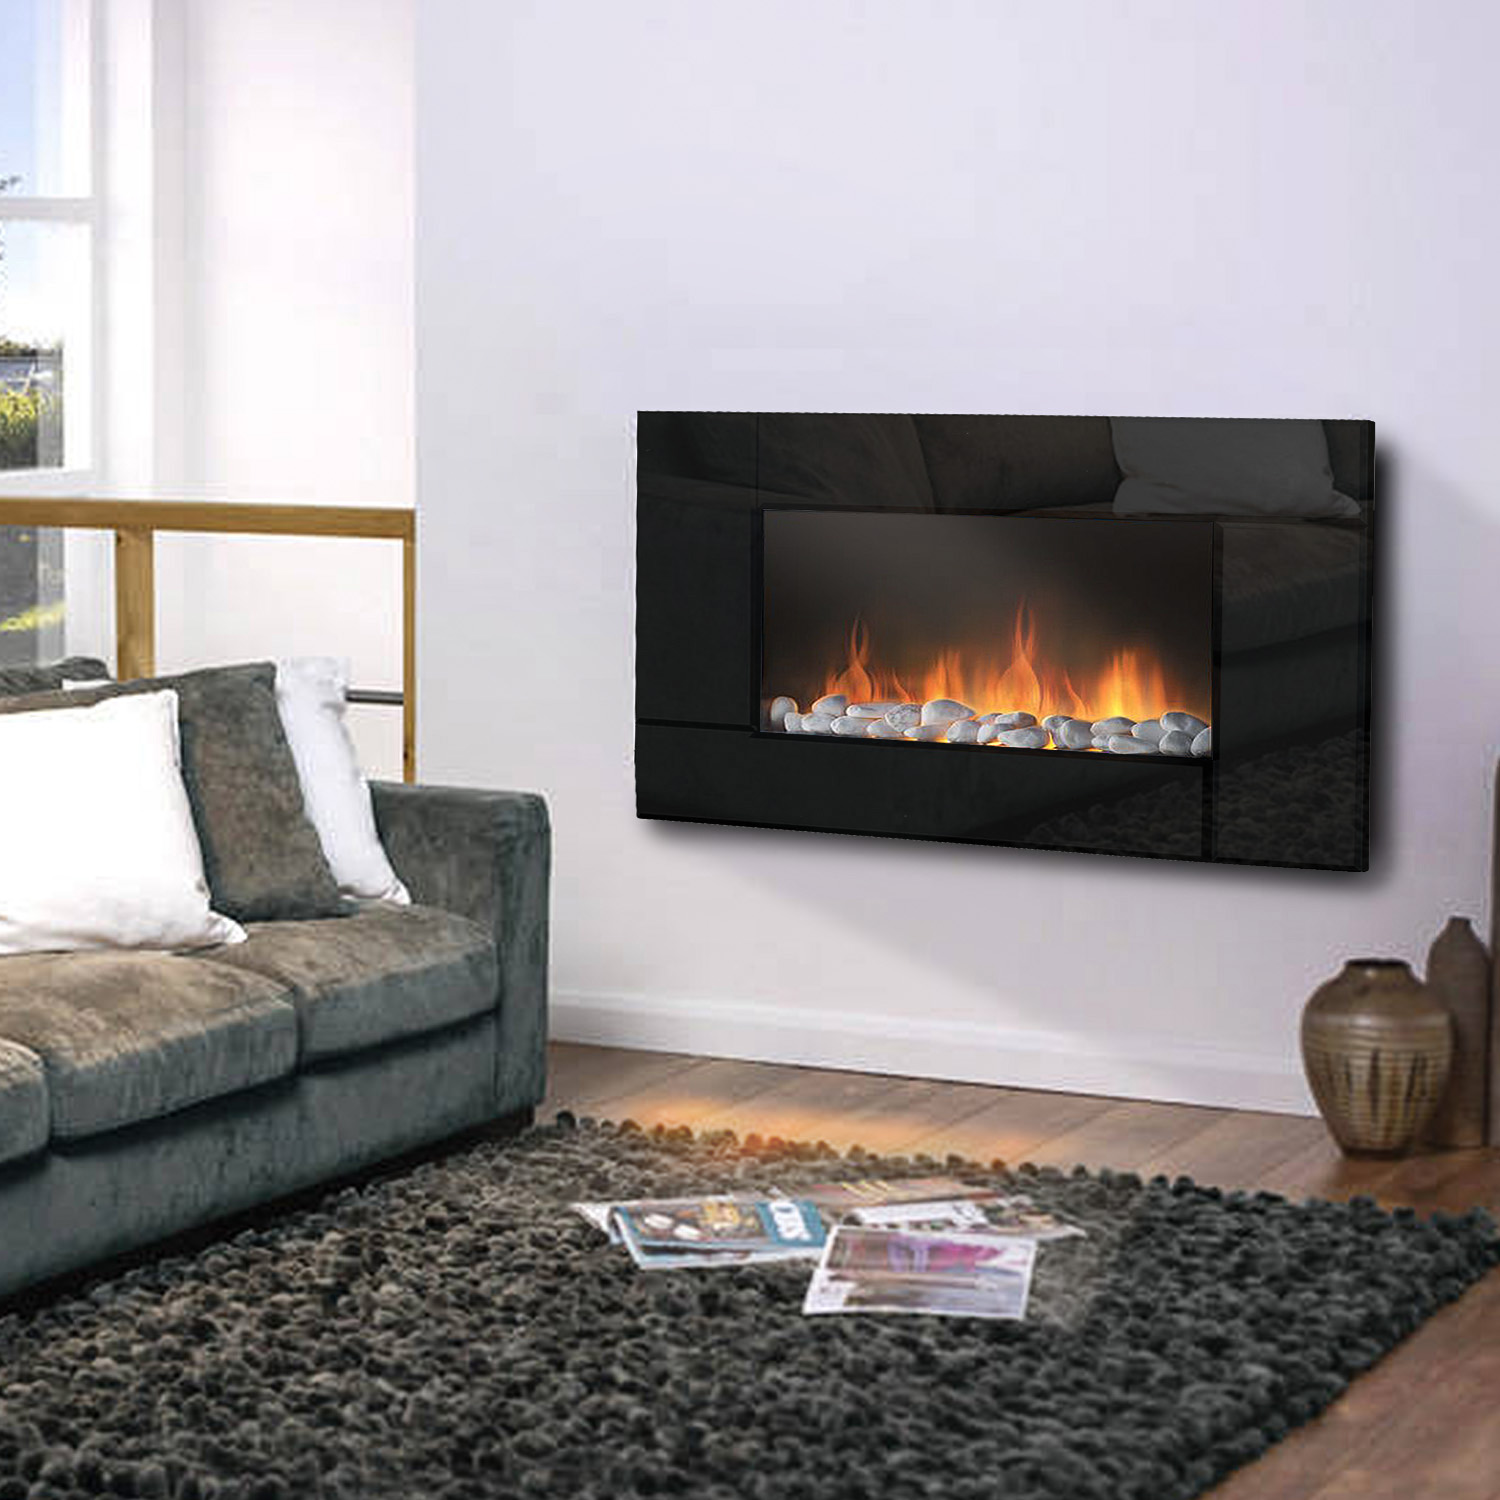 GLOWMASTER Electric Fire Fireplace Curved Black Glass Wall Mounted Flame Living Room Heater 